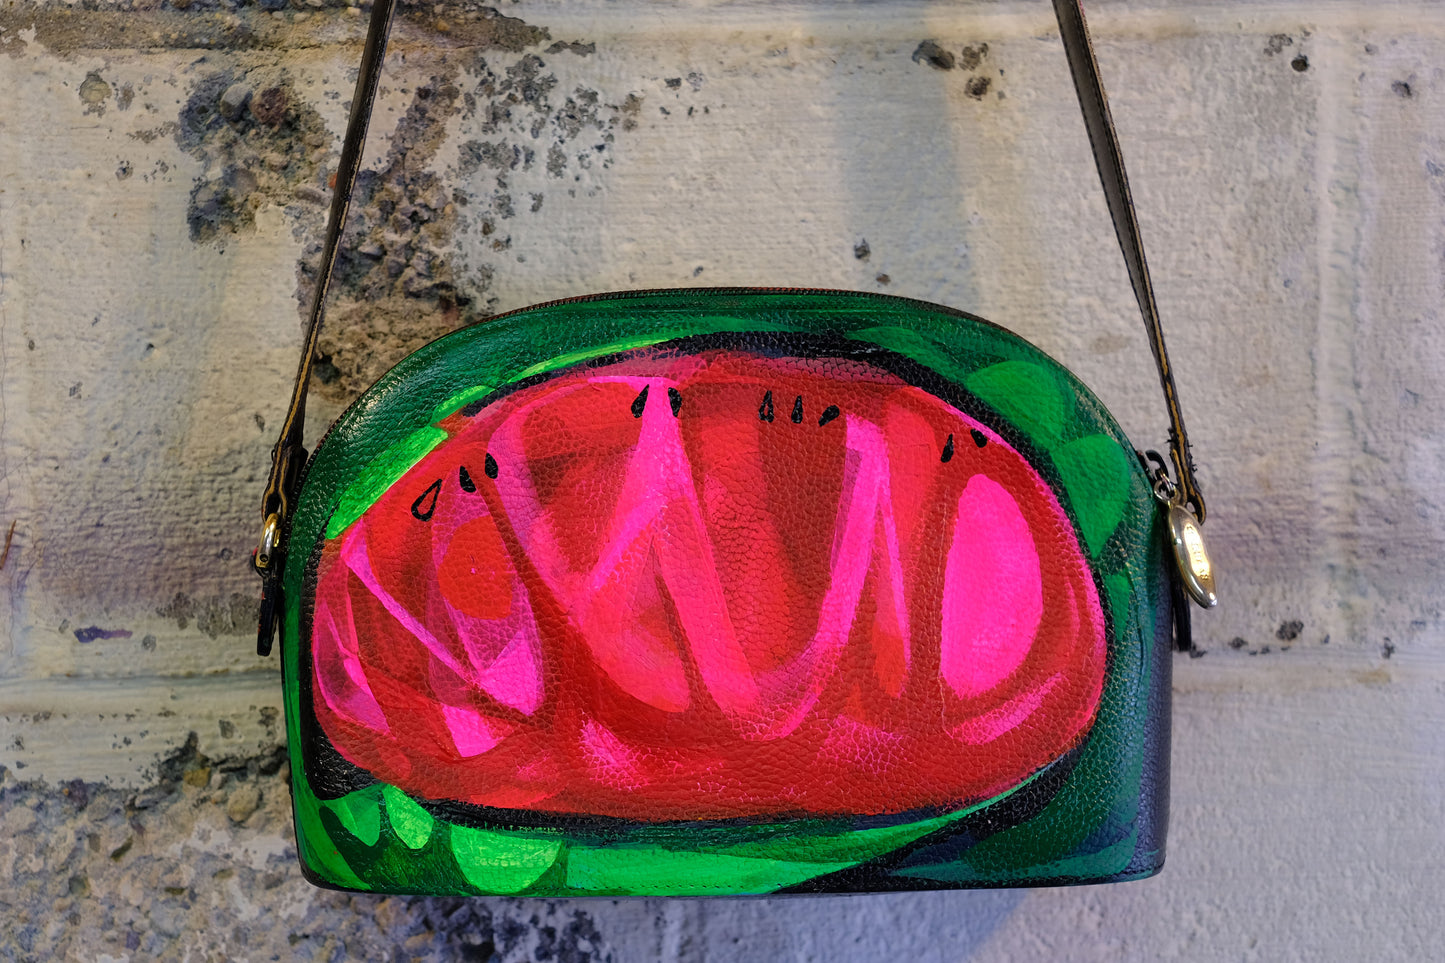 Electric Melon - Cole Han Purse - Hand Painted by Matthew Phipps Hines